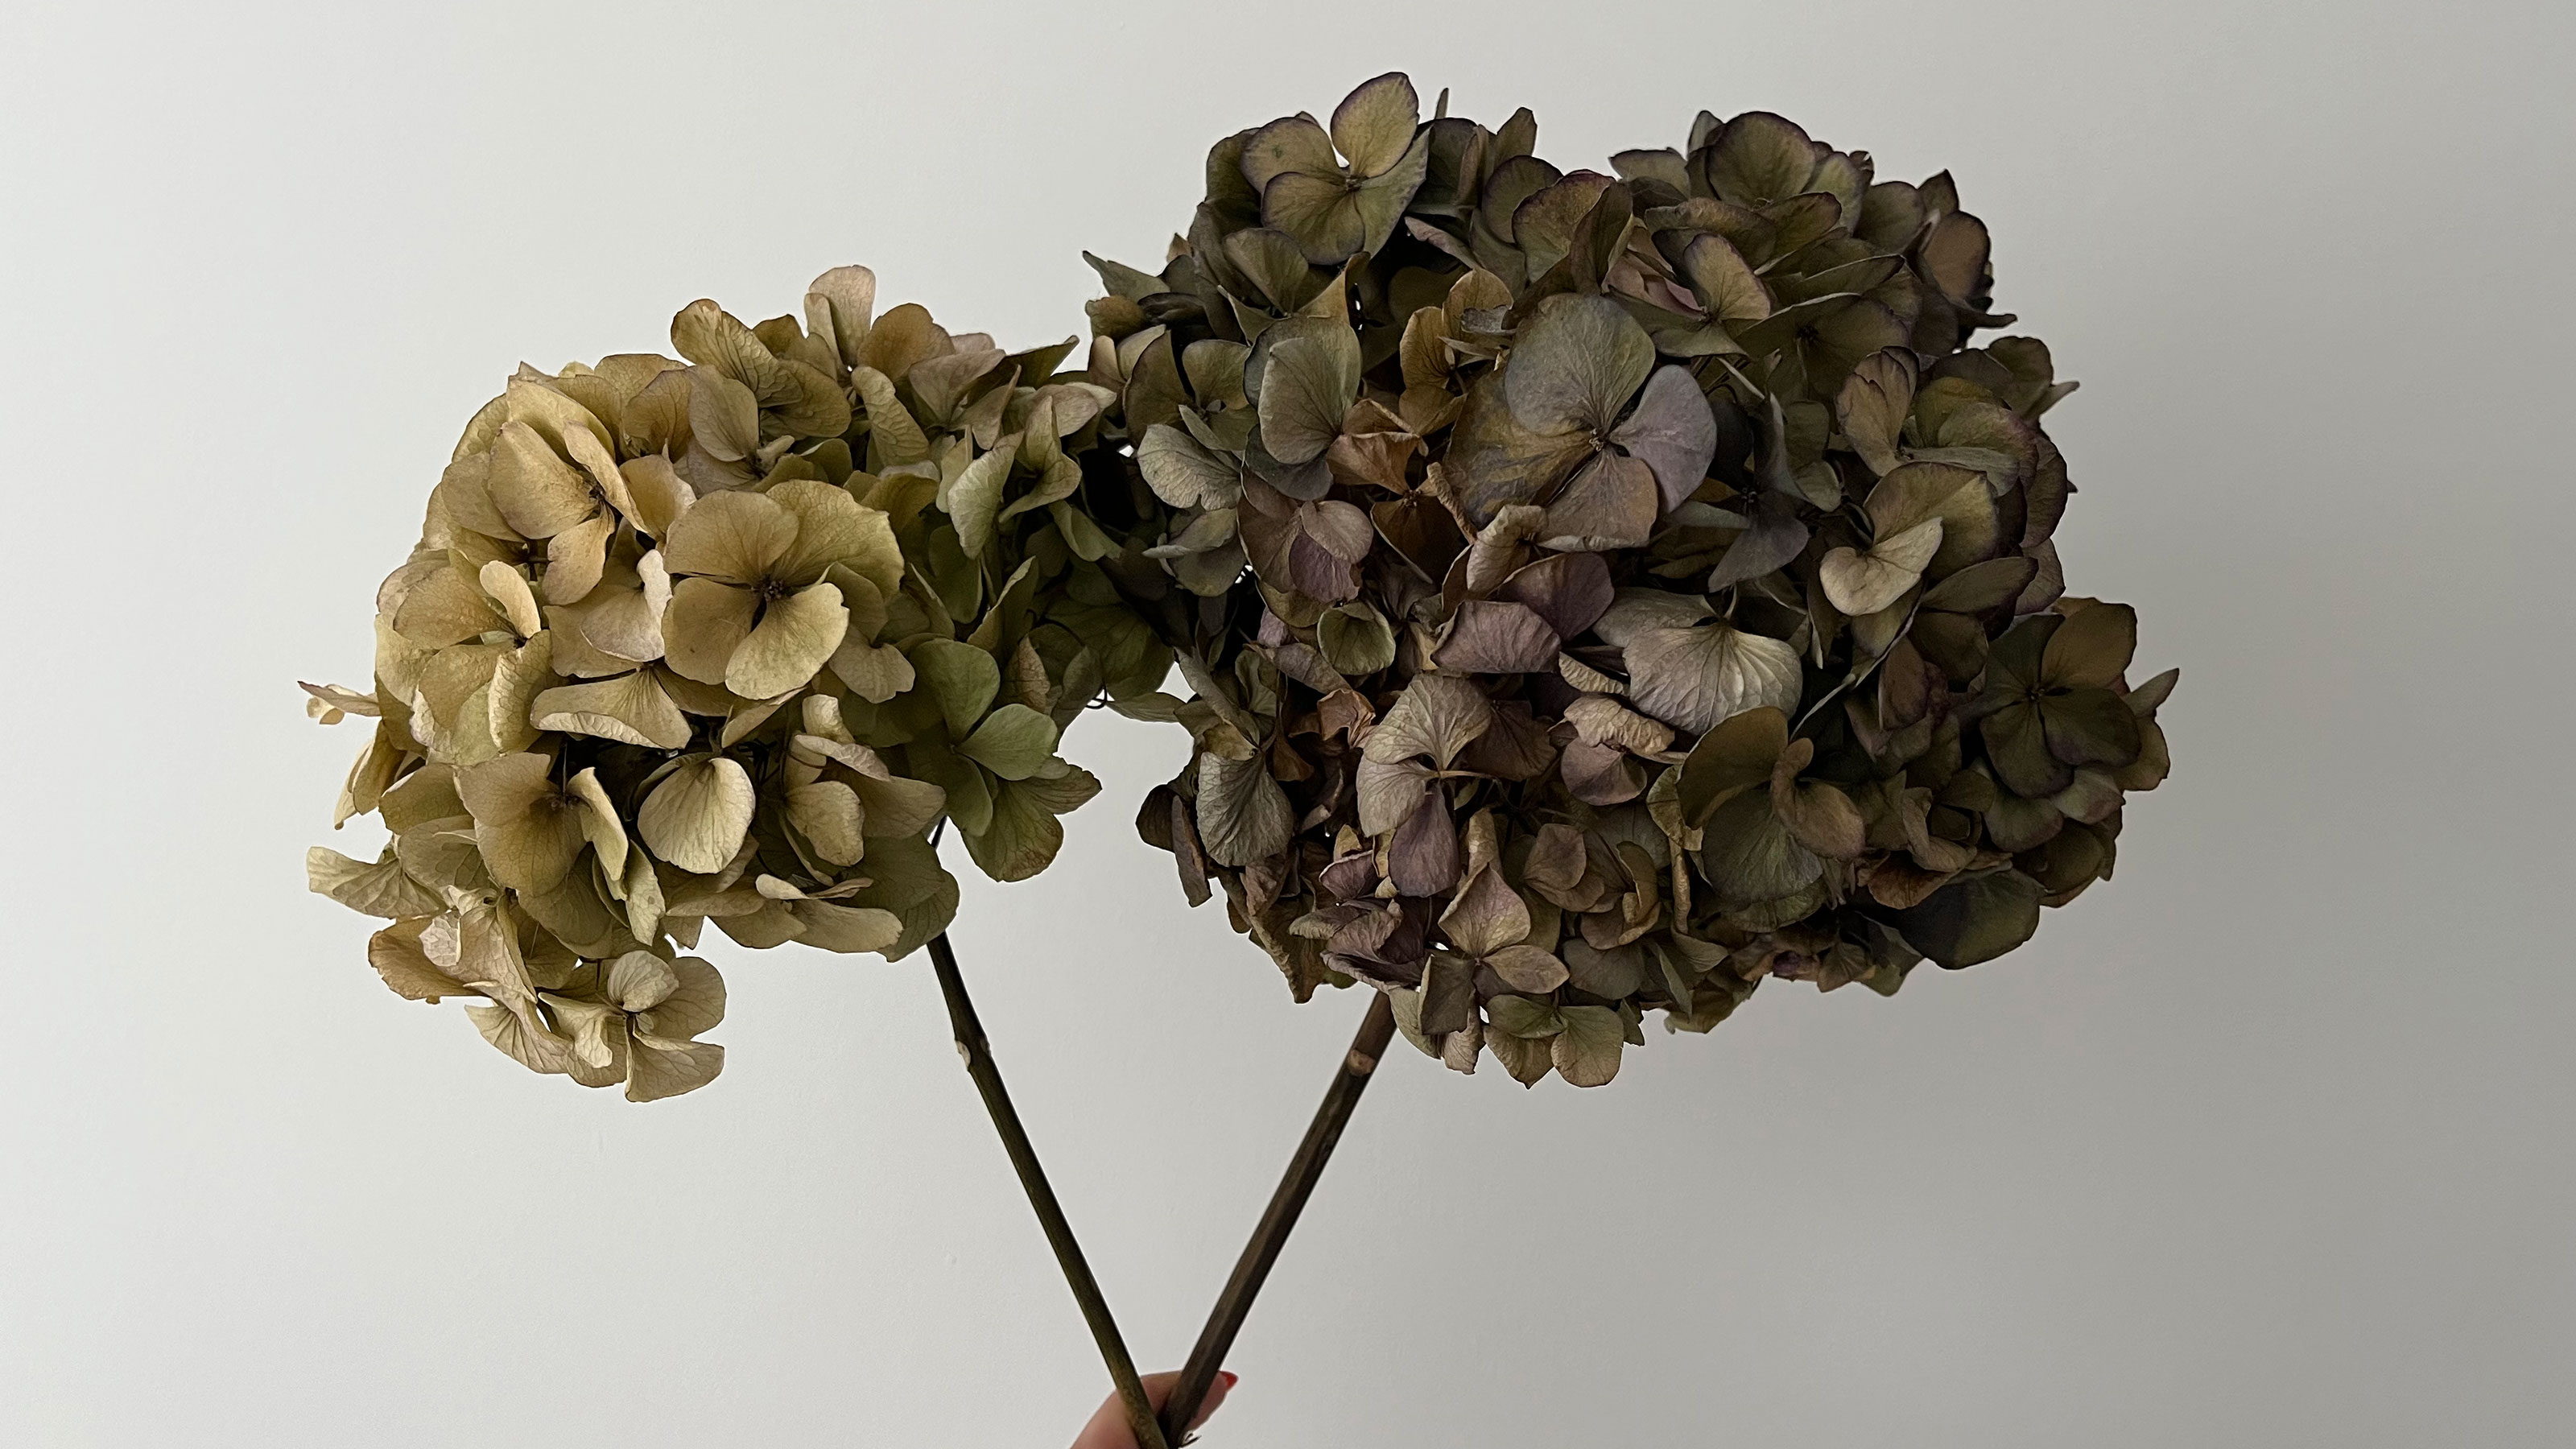 How to dry hydrangeas: 3 ways to preserve their colorful blooms